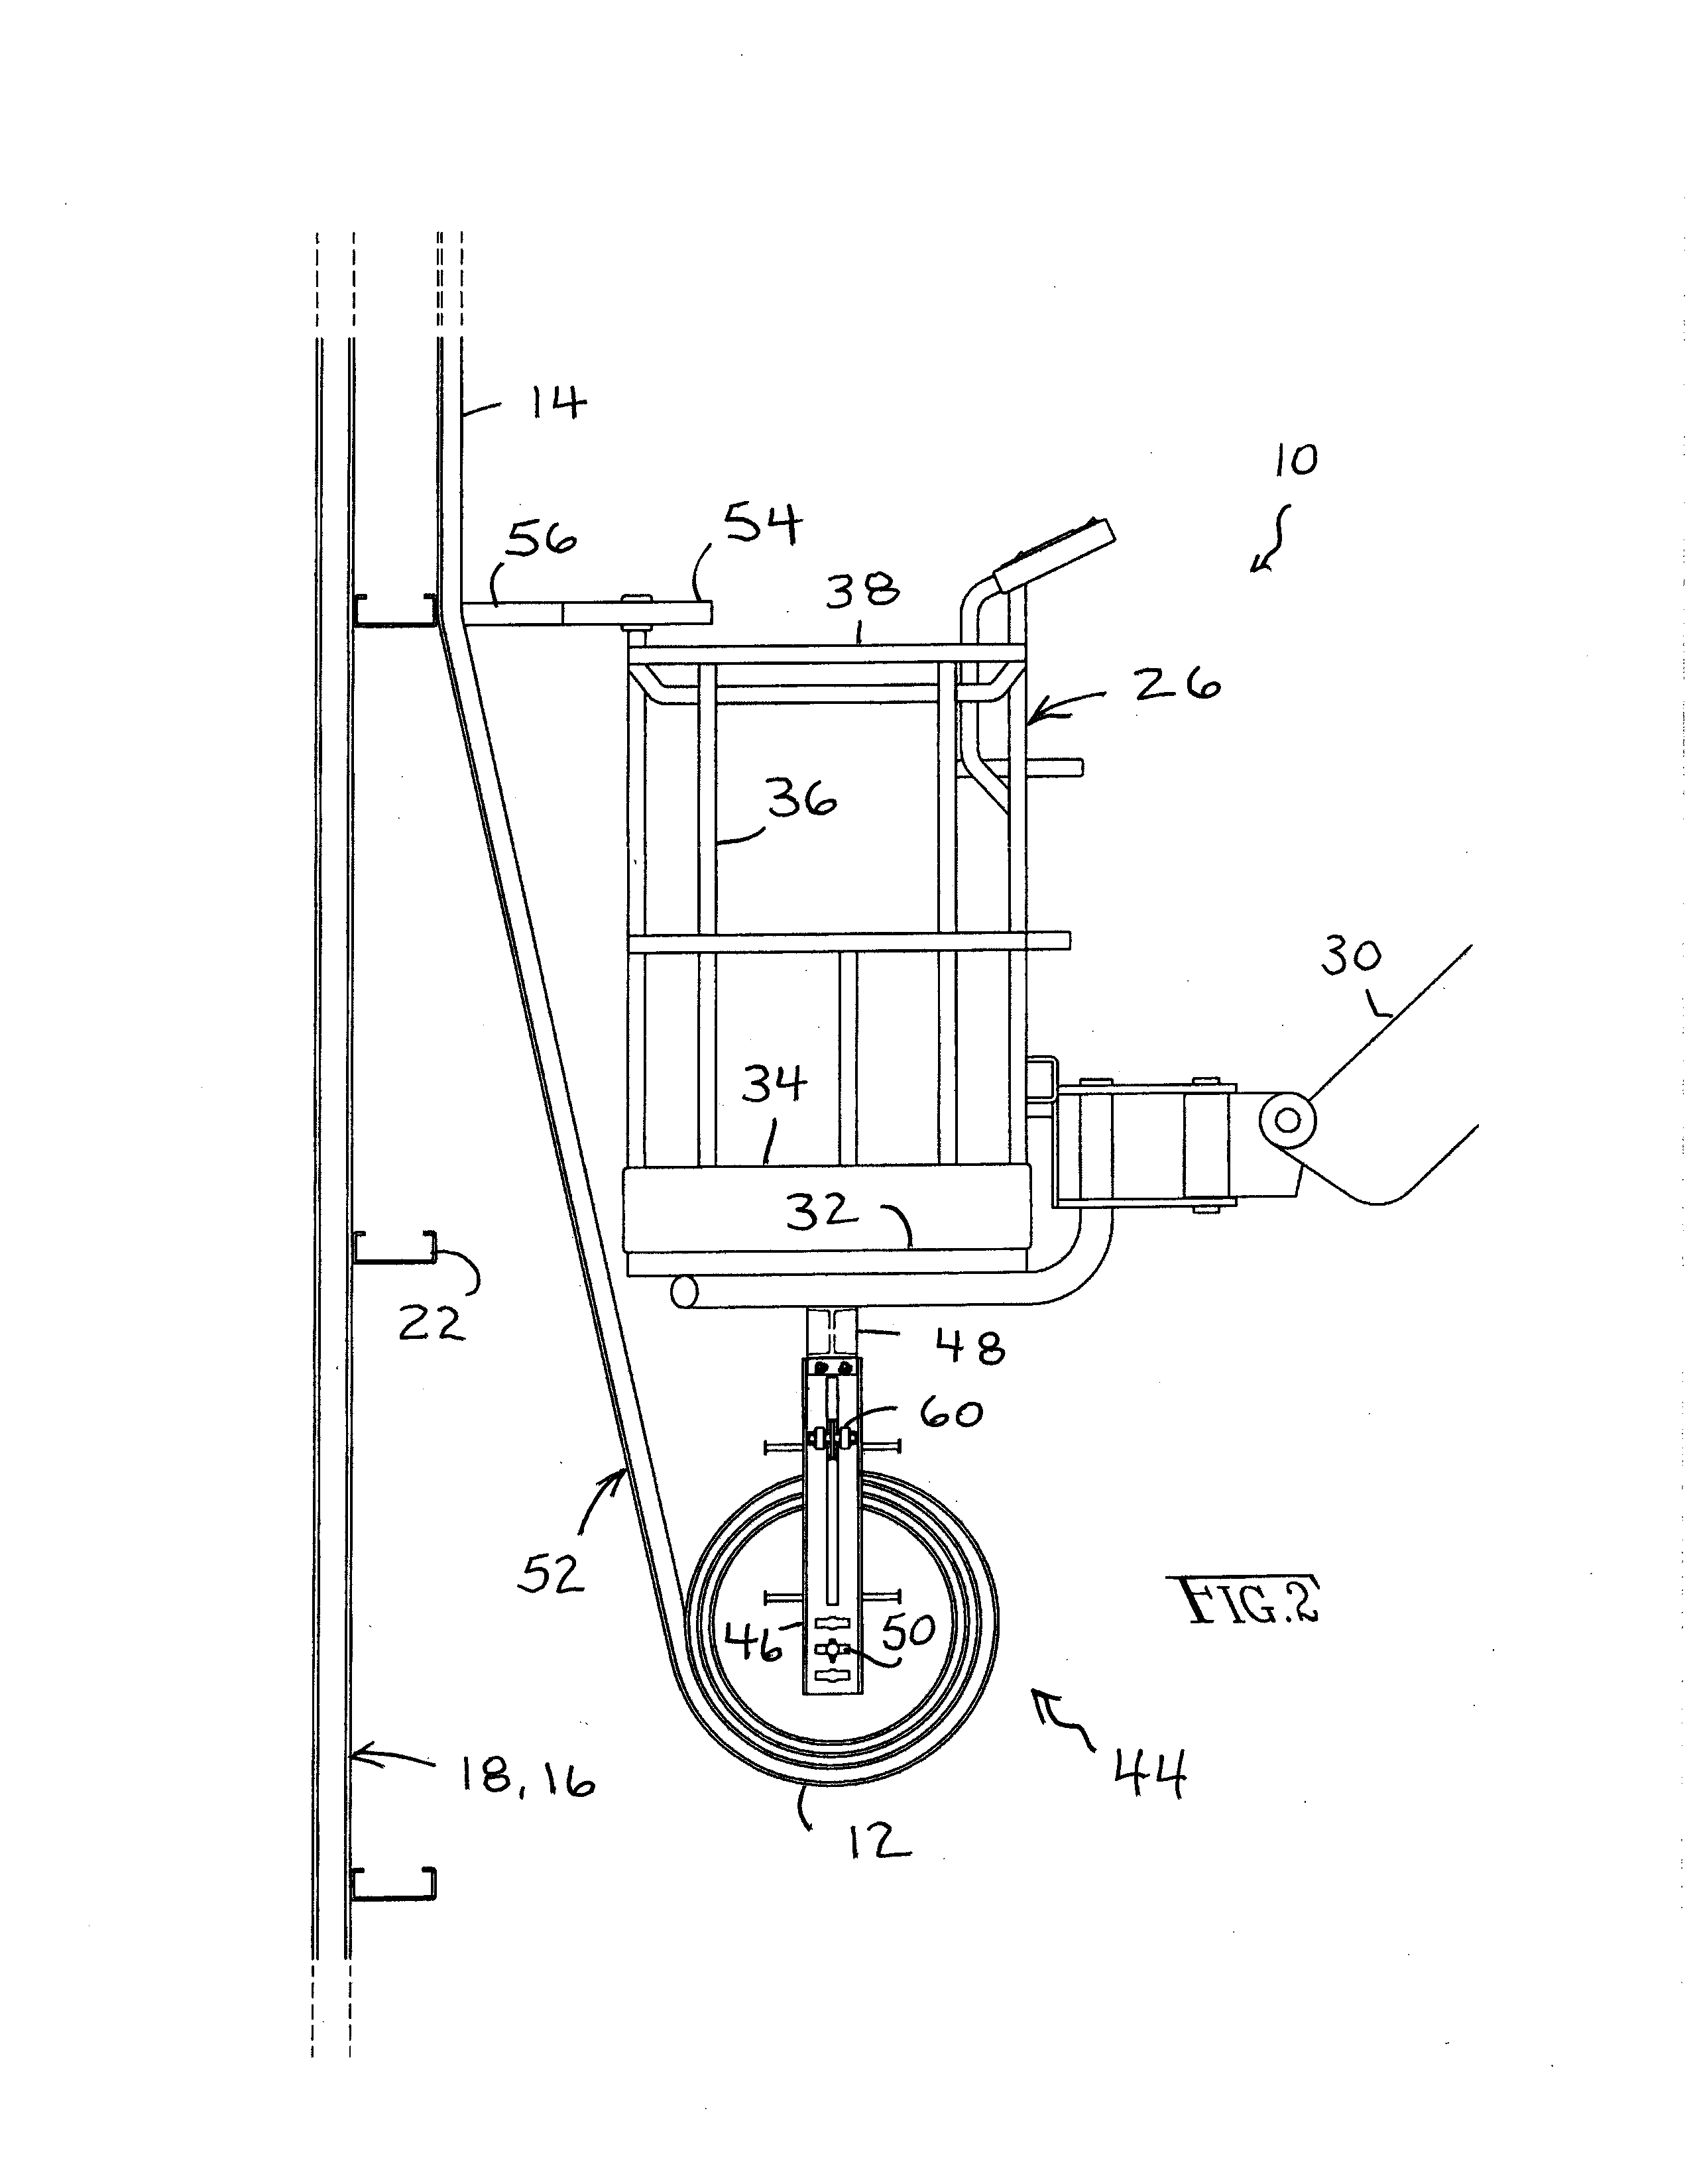 Apparatus for unrolling rolls of insulation in vertical strips from the top down